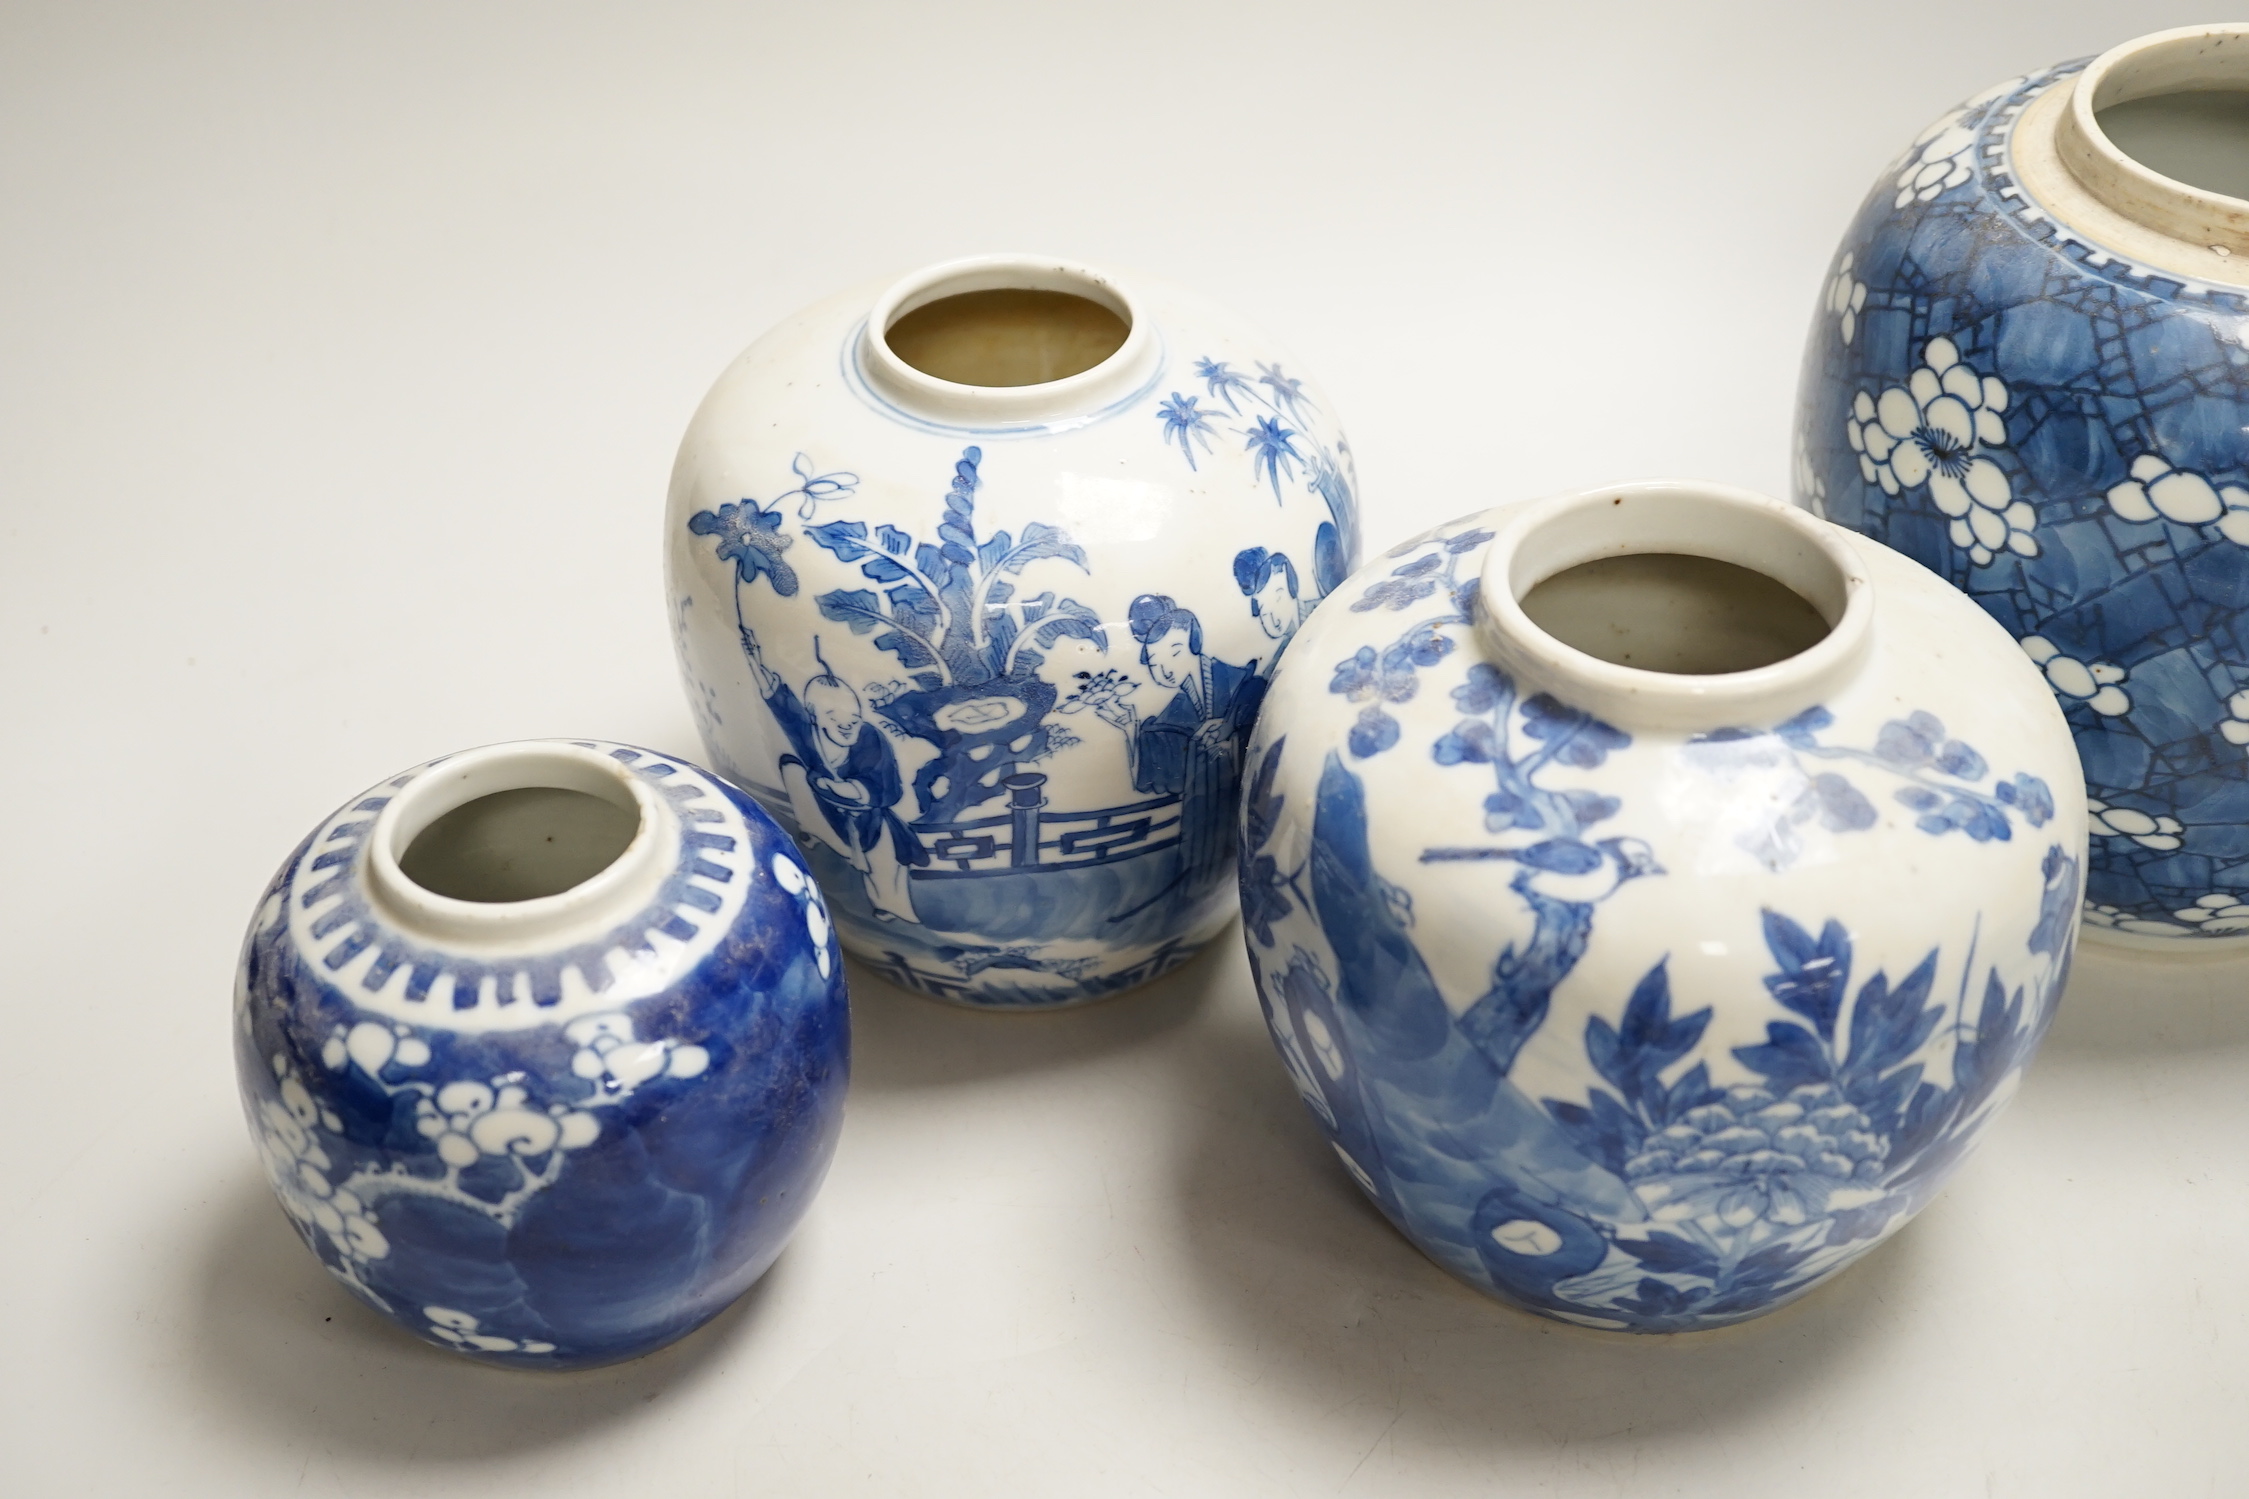 An 18th century Chinese blue and white Prunus jar and three 19th century Chinese blue and white jars, tallest 16cm